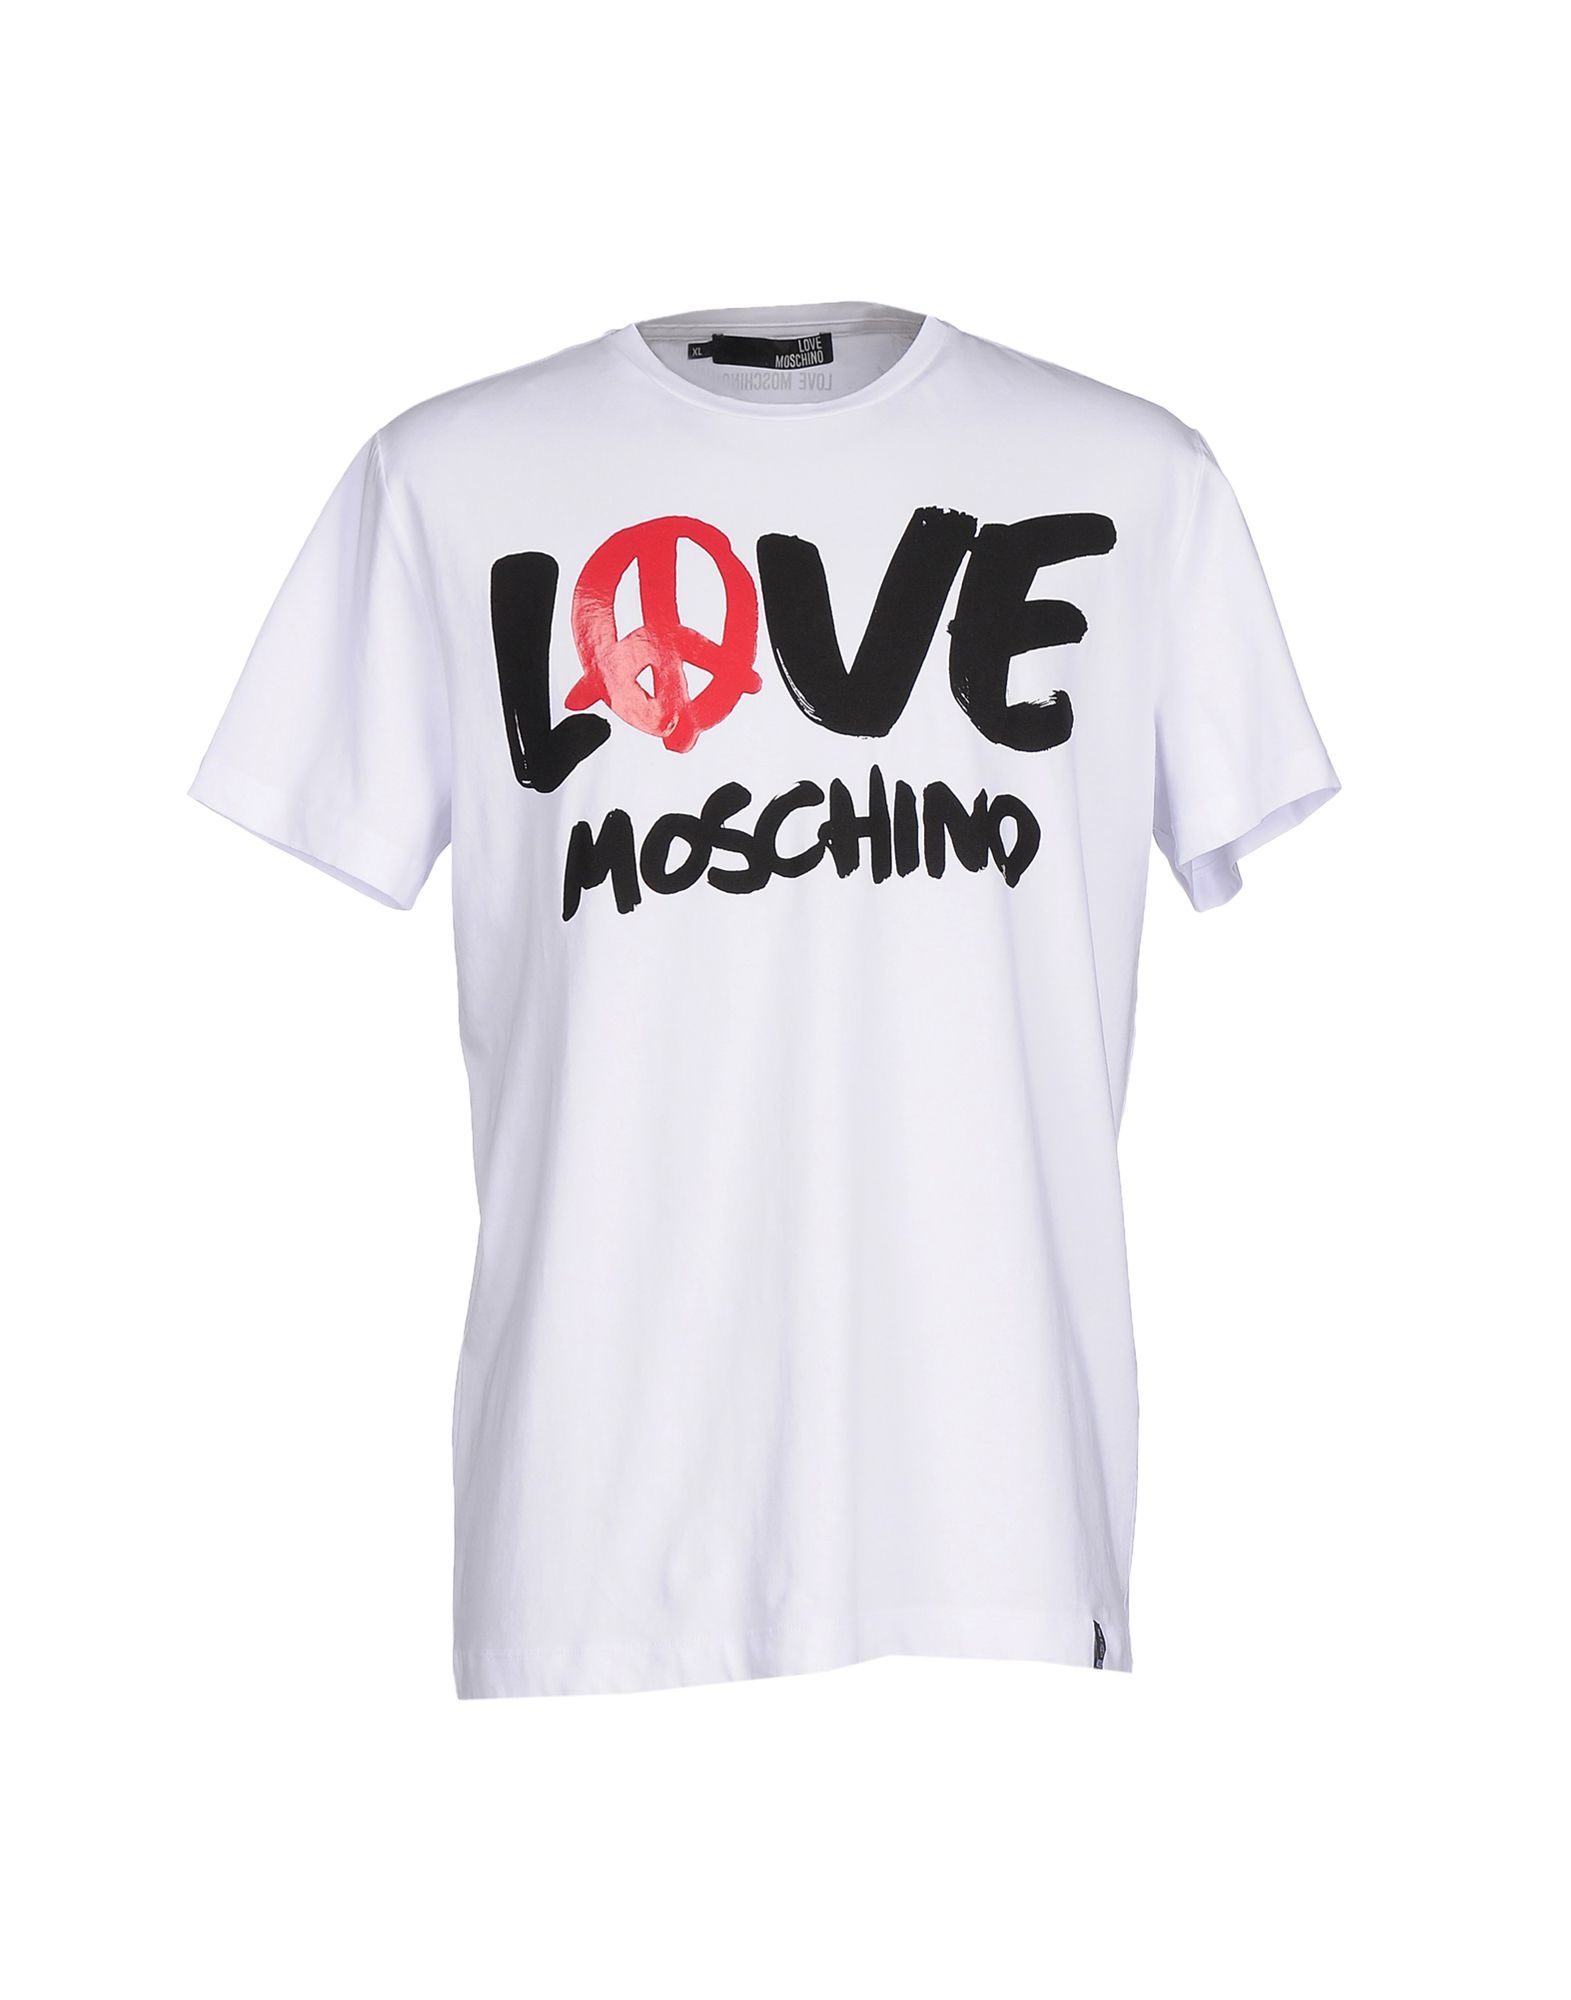 Lyst - Love Moschino T-shirt in White for Men